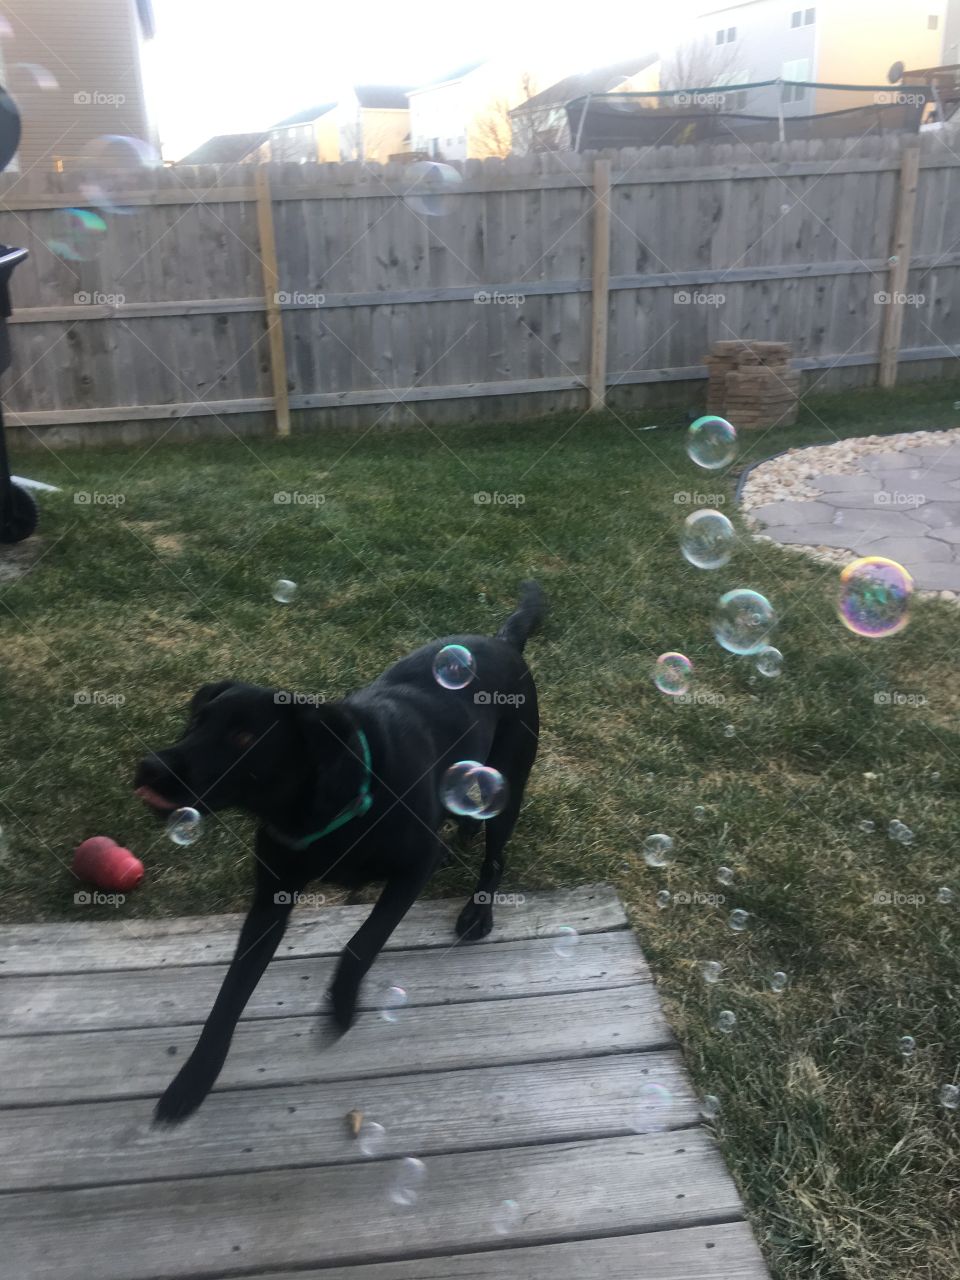 Bubbles are a dog’s best friend